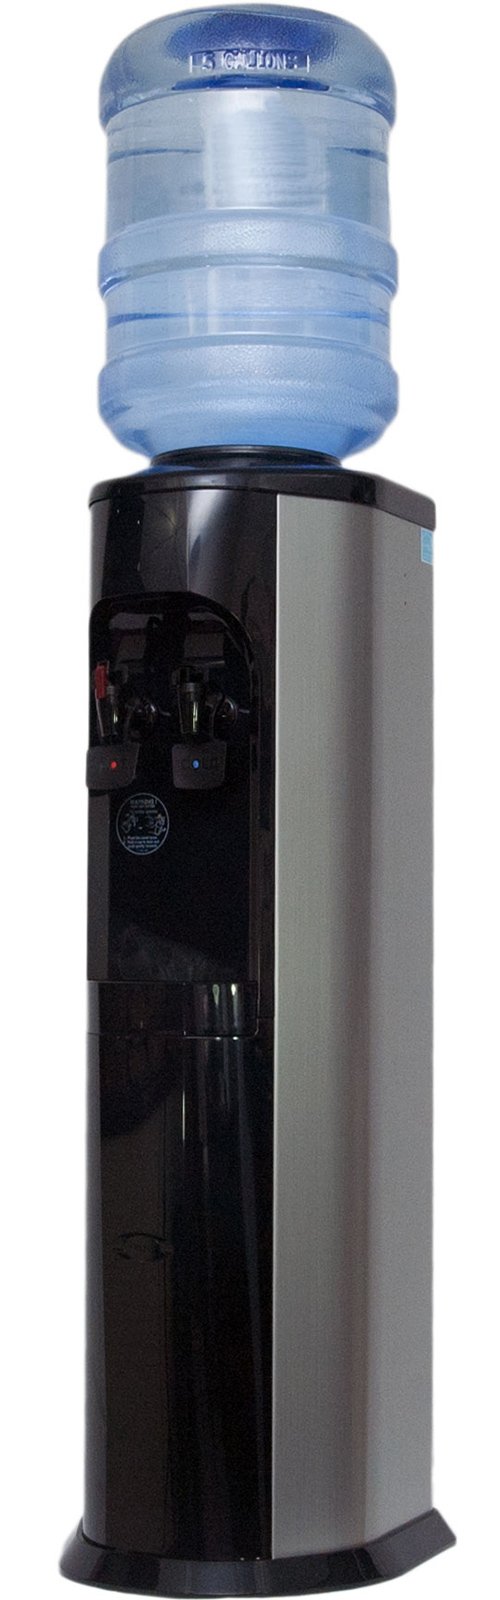 Clover B14A Hot and Cold Bottled Water Dispenser